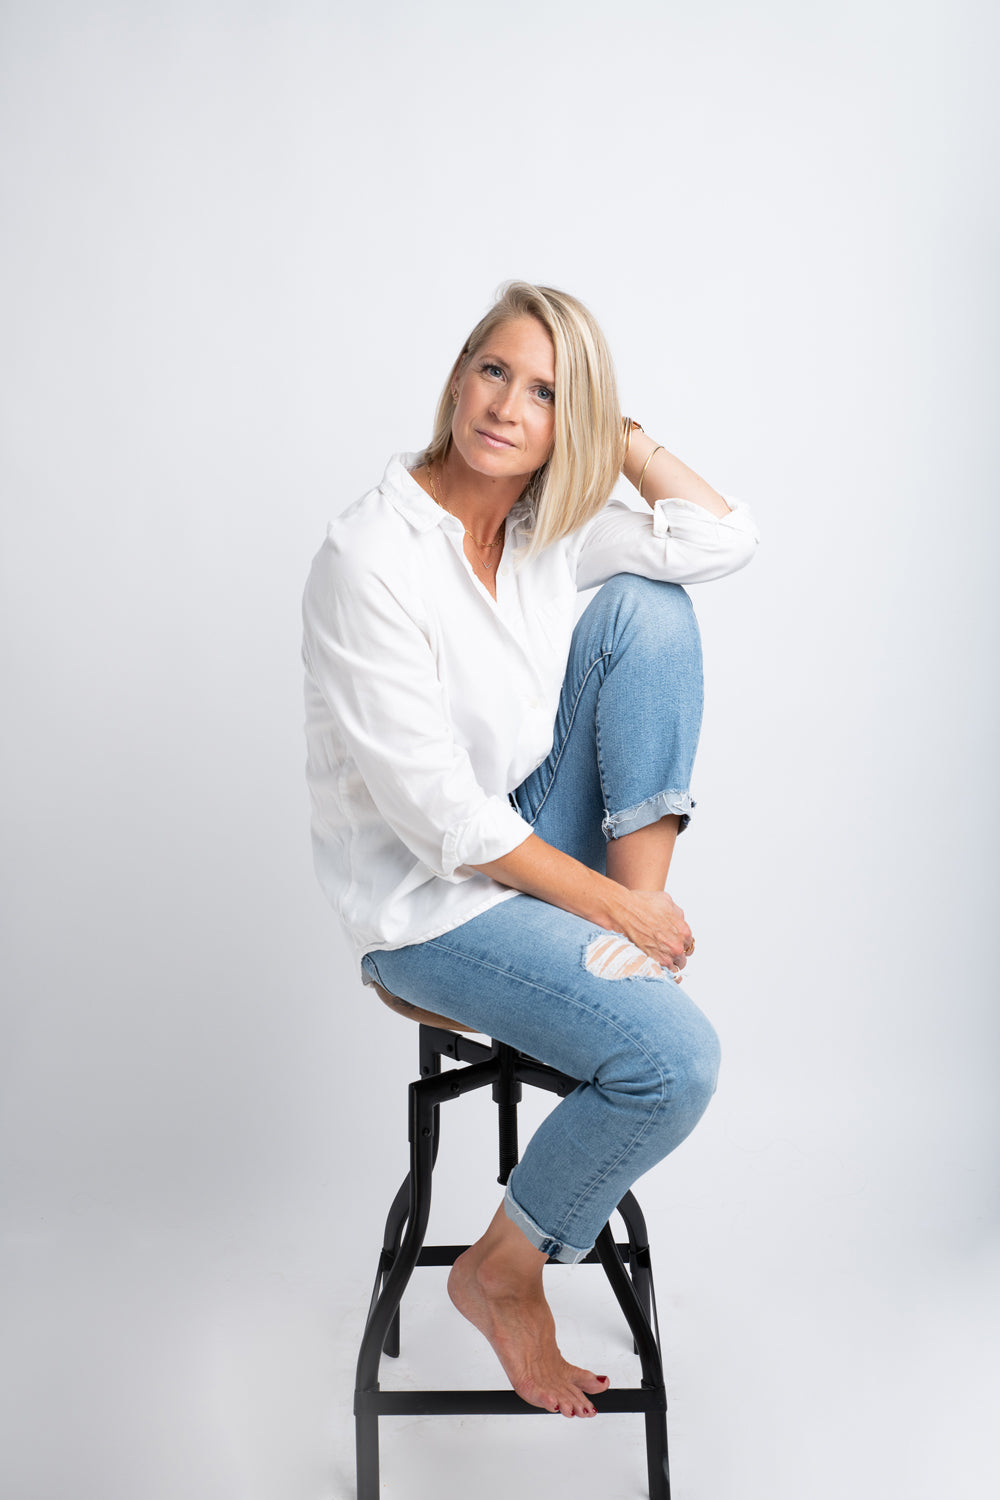 Headshot of photographer Amanda Anderson sitting on a stool in jeans and white shirt